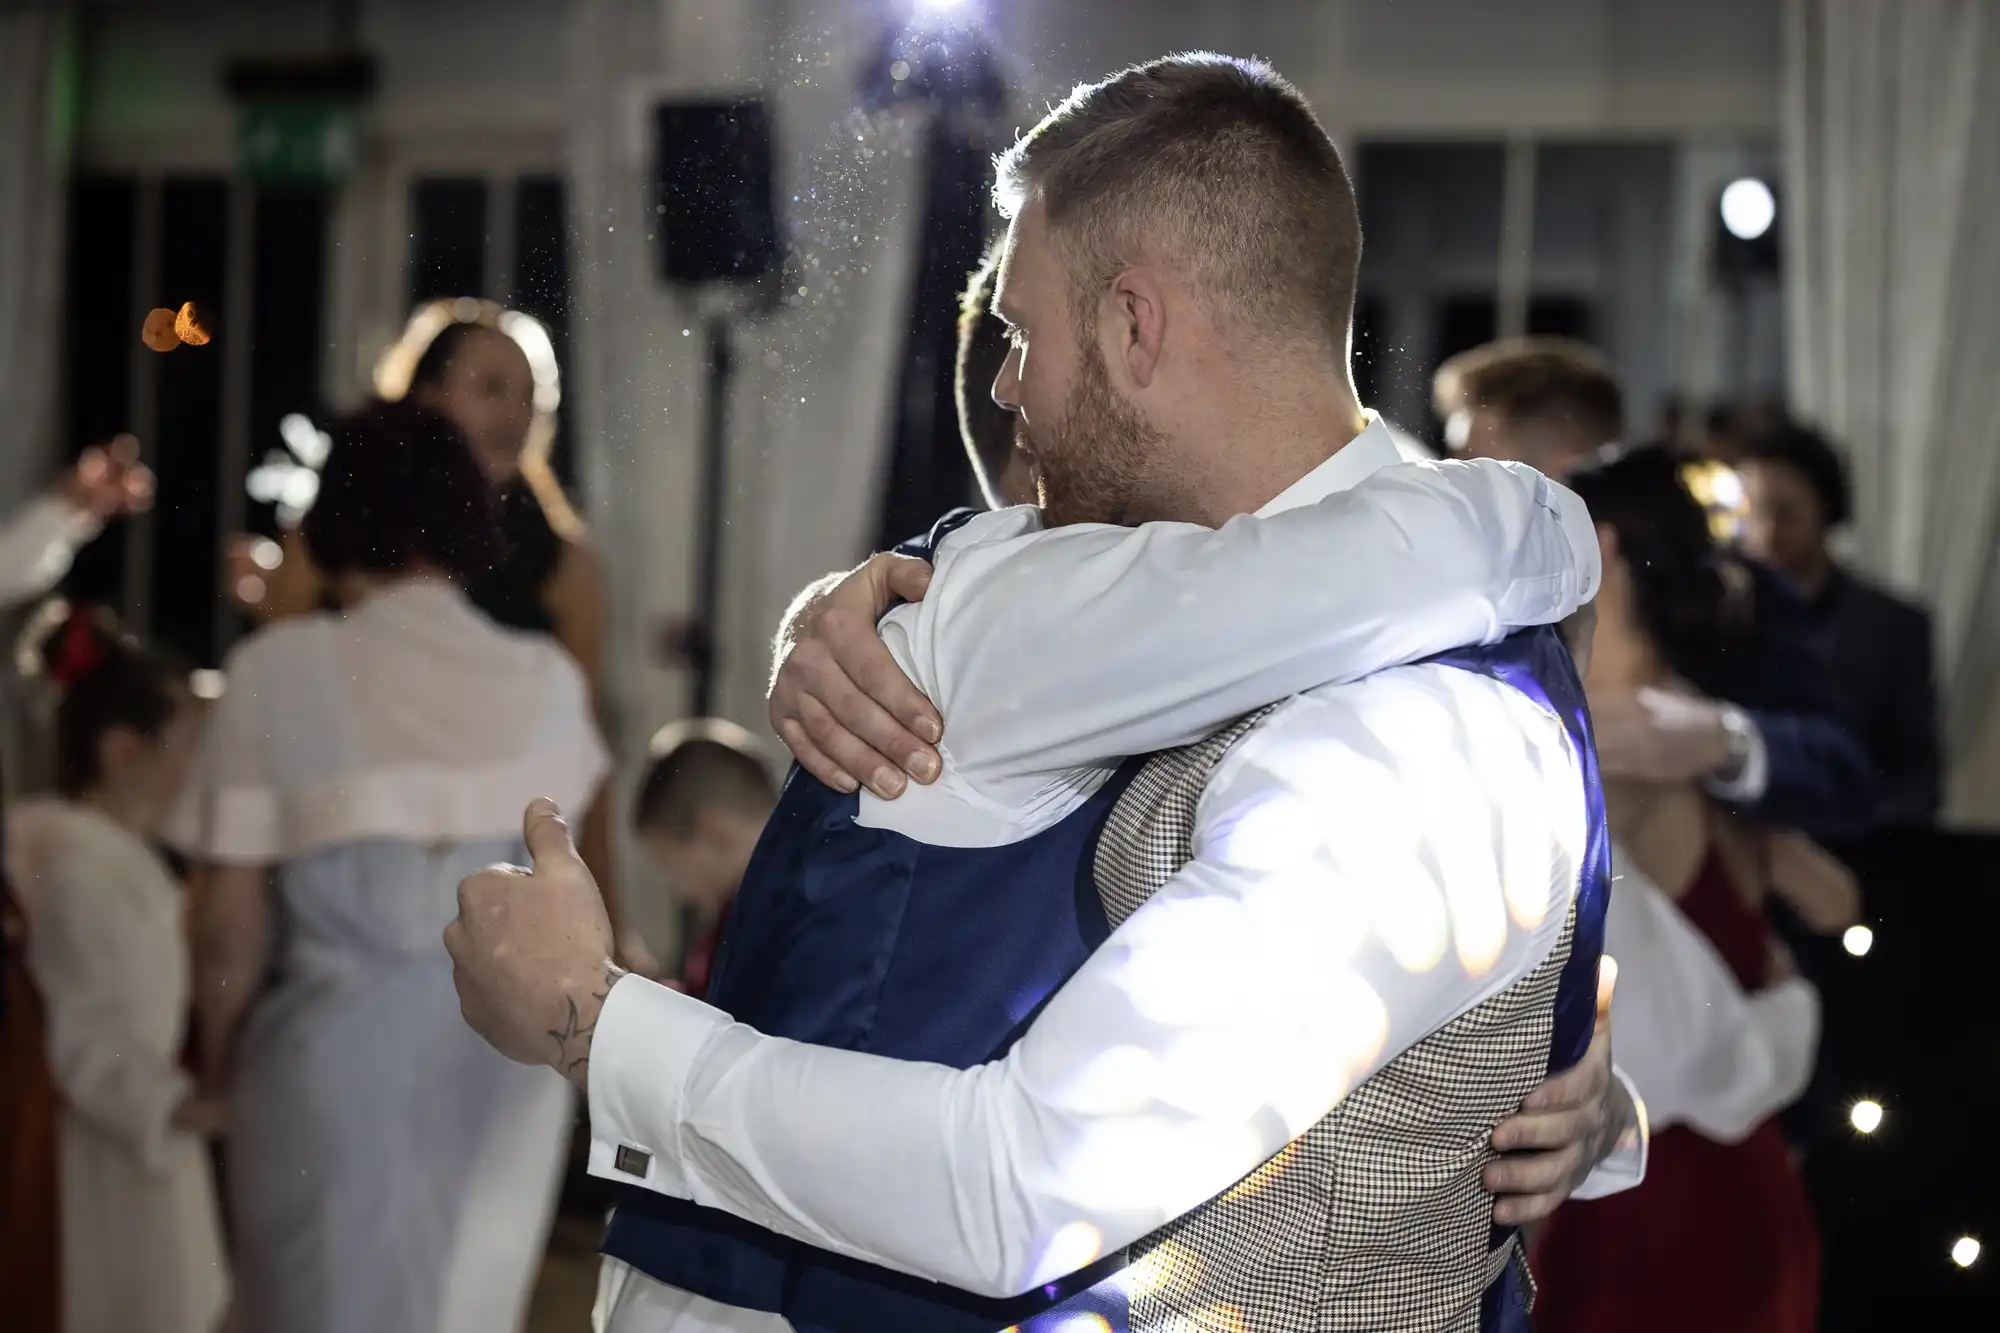 Two men in formal attire hug each other on a dance floor during a celebration, with people dancing in the background.